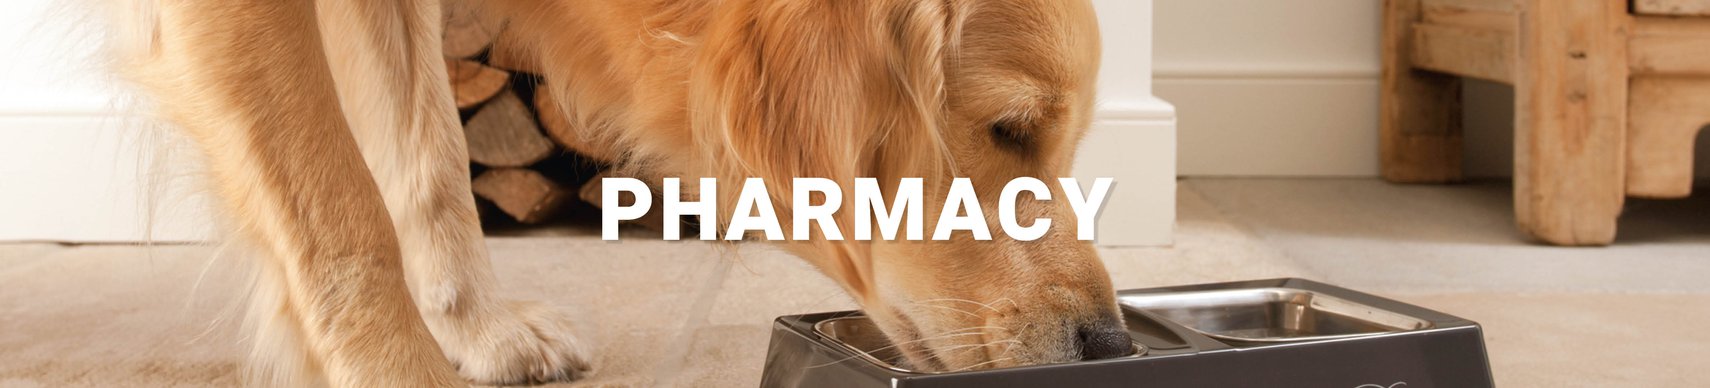 Pharmacy for animals and humans online sale at 